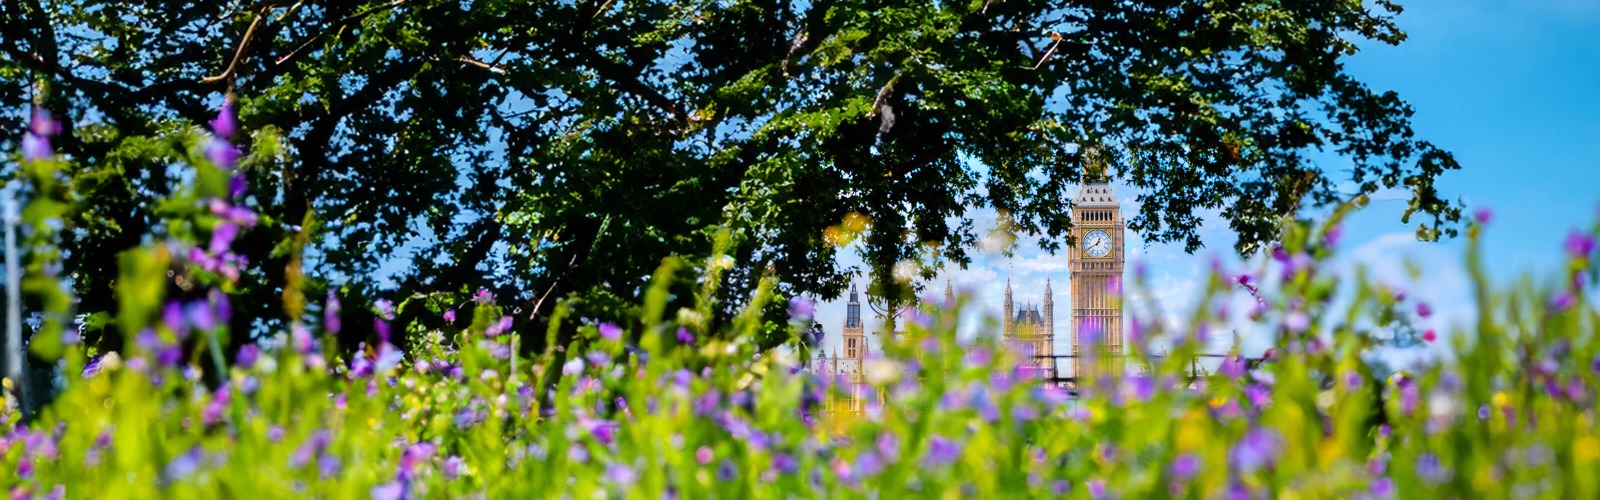 Big Ben in the background of flowers